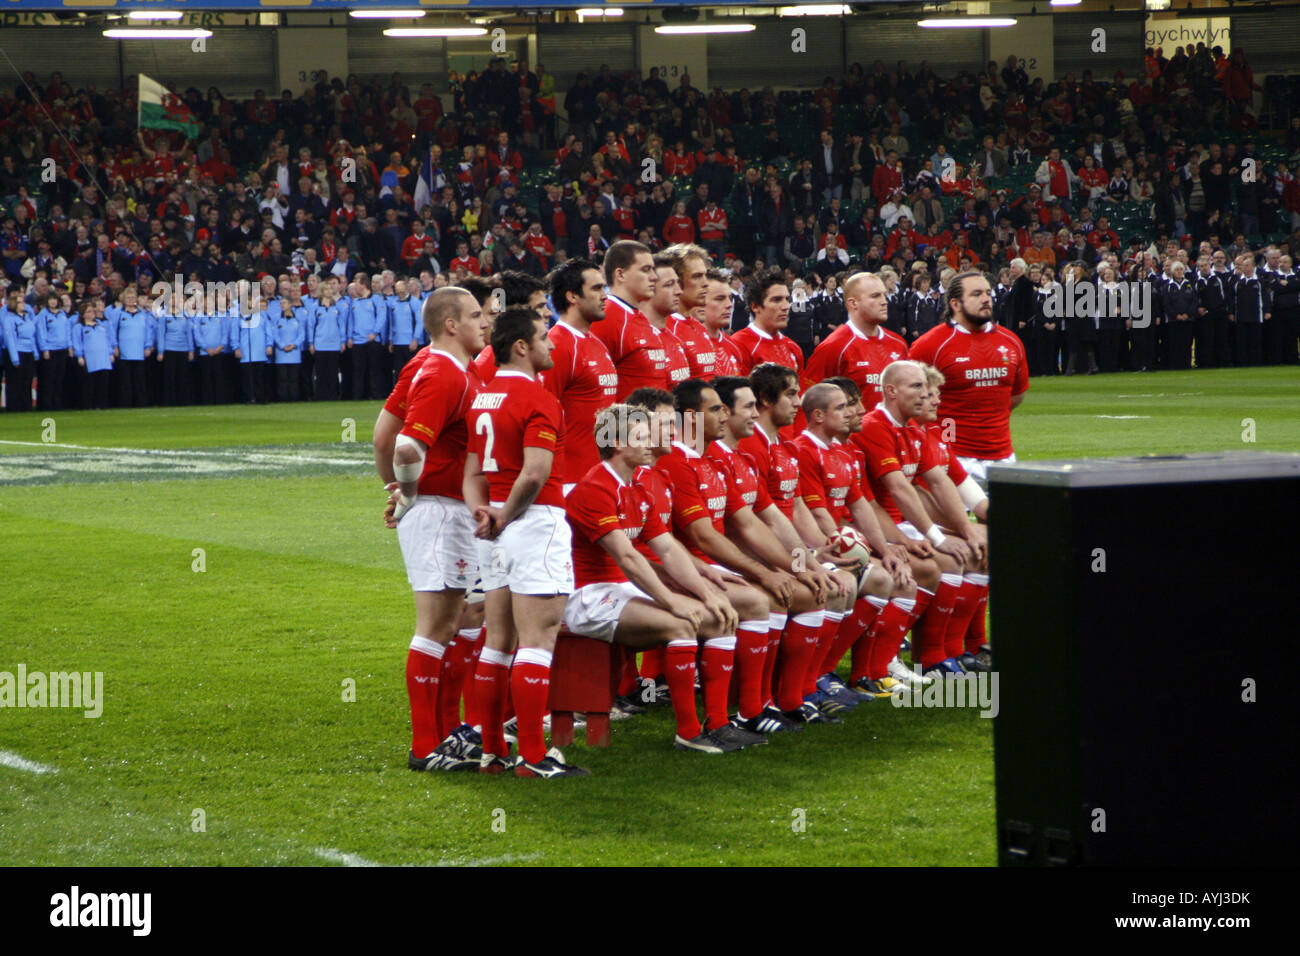 Welsh rugby team lining up for the photo before Wales v France, Grand Slam day at the Millenium Stadium, Cardiff, 2008 Stock Photo